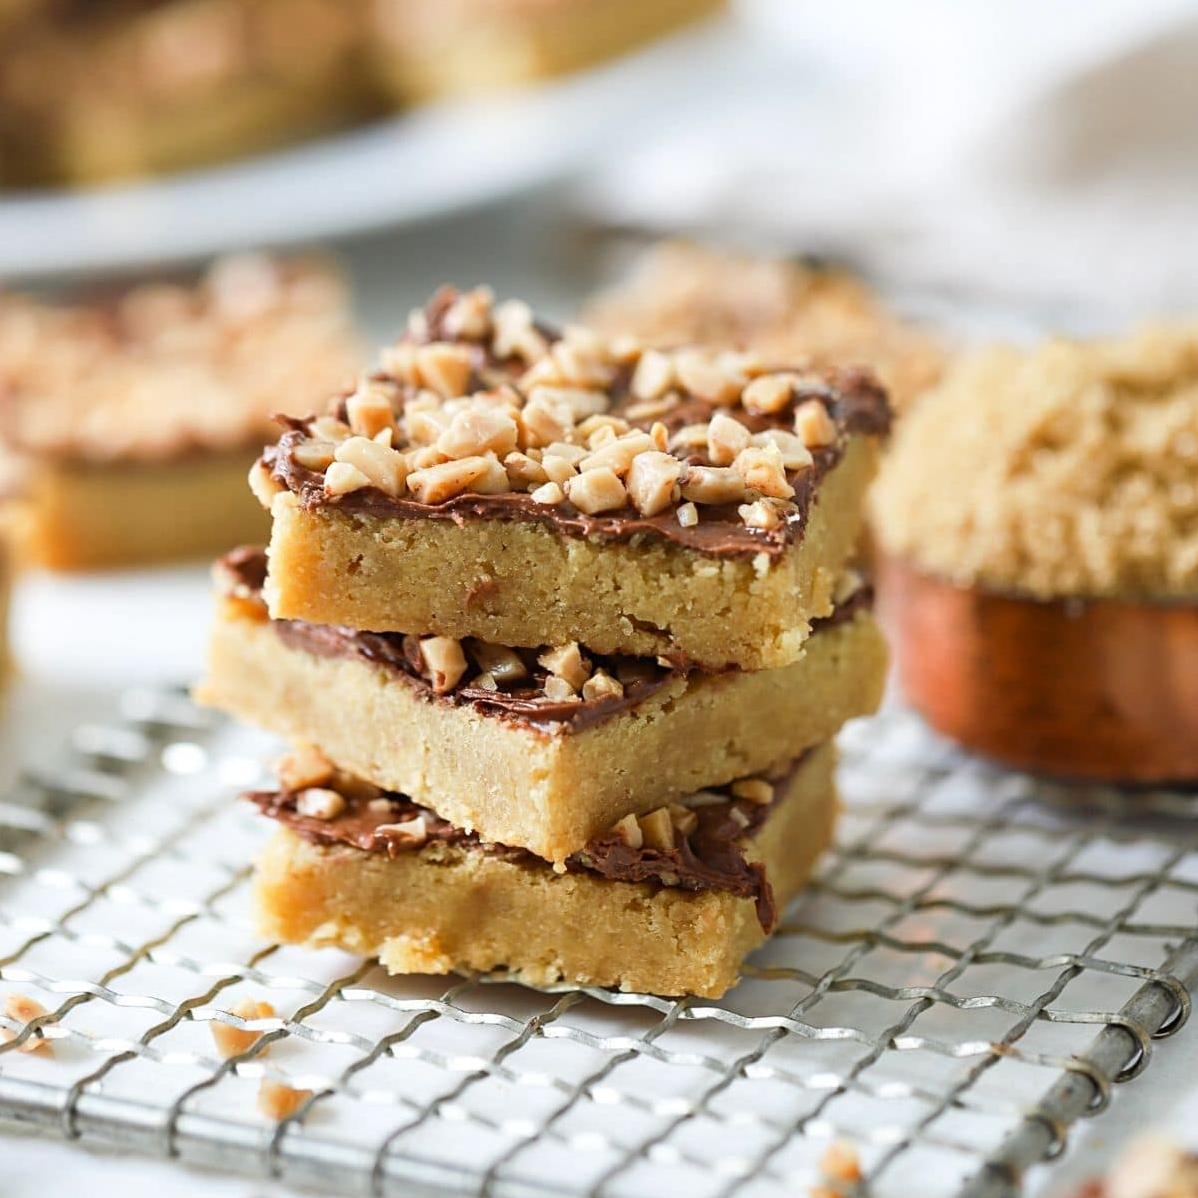  Trust me, you won't be able to stop at just one of these decadent toffee bars.